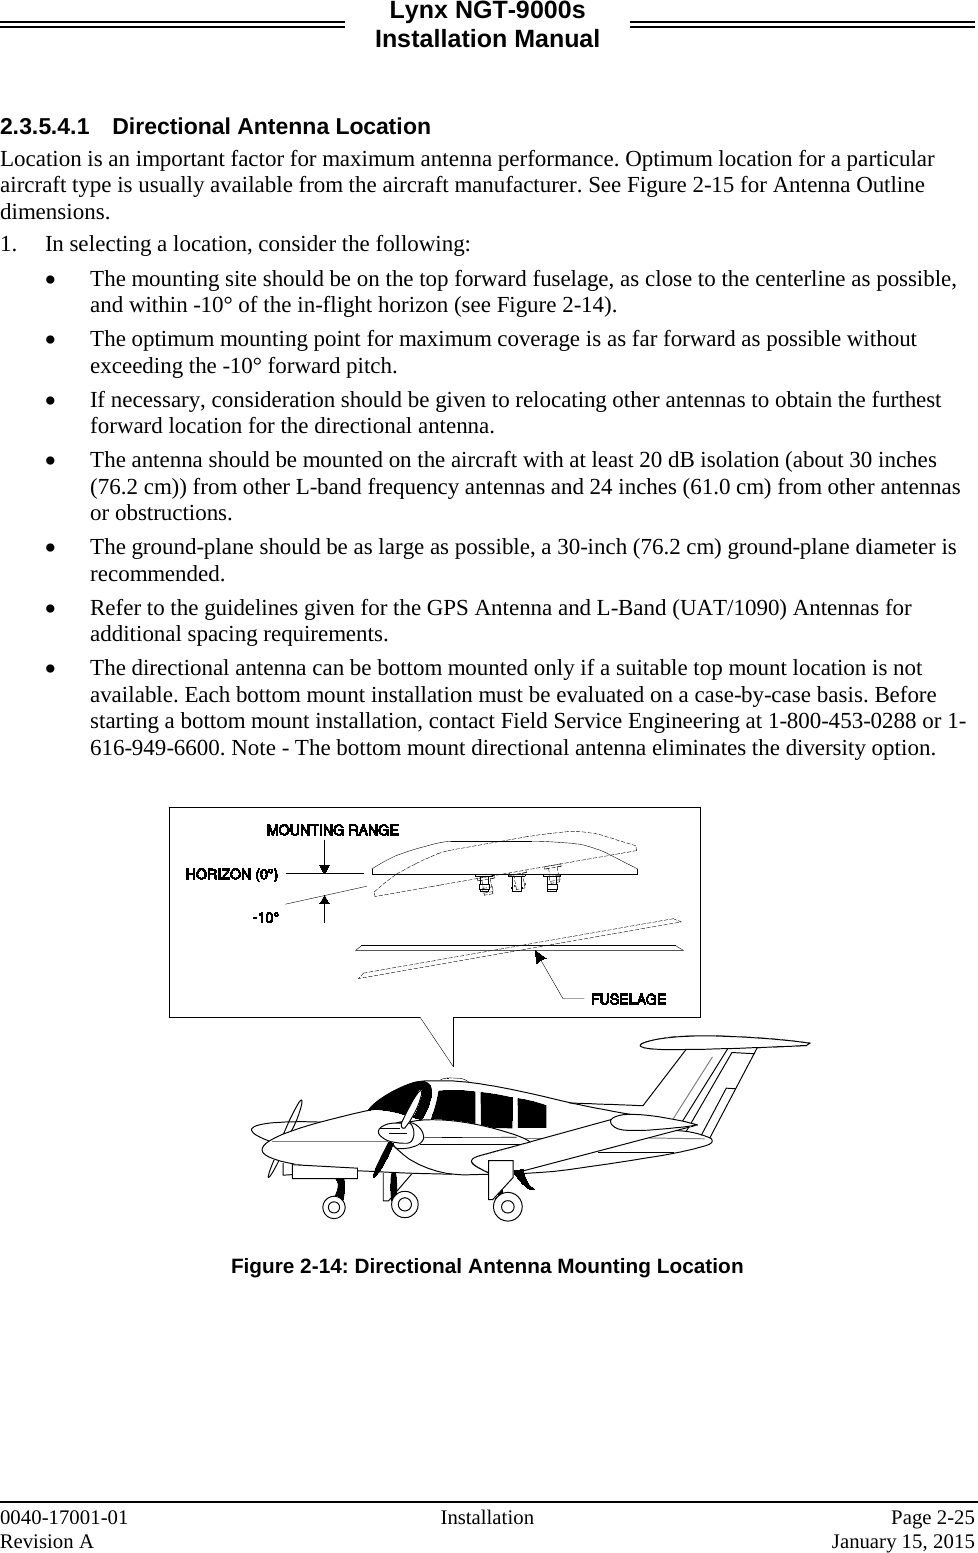 Lynx NGT-9000s Installation Manual   2.3.5.4.1 Directional Antenna Location Location is an important factor for maximum antenna performance. Optimum location for a particular aircraft type is usually available from the aircraft manufacturer. See Figure 2-15 for Antenna Outline dimensions. 1. In selecting a location, consider the following:  • The mounting site should be on the top forward fuselage, as close to the centerline as possible, and within -10° of the in-flight horizon (see Figure 2-14).  • The optimum mounting point for maximum coverage is as far forward as possible without exceeding the -10° forward pitch.  • If necessary, consideration should be given to relocating other antennas to obtain the furthest forward location for the directional antenna.  • The antenna should be mounted on the aircraft with at least 20 dB isolation (about 30 inches (76.2 cm)) from other L-band frequency antennas and 24 inches (61.0 cm) from other antennas or obstructions.  • The ground-plane should be as large as possible, a 30-inch (76.2 cm) ground-plane diameter is recommended. • Refer to the guidelines given for the GPS Antenna and L-Band (UAT/1090) Antennas for additional spacing requirements.  • The directional antenna can be bottom mounted only if a suitable top mount location is not available. Each bottom mount installation must be evaluated on a case-by-case basis. Before starting a bottom mount installation, contact Field Service Engineering at 1-800-453-0288 or 1-616-949-6600. Note - The bottom mount directional antenna eliminates the diversity option.     Figure 2-14: Directional Antenna Mounting Location    0040-17001-01 Installation   Page 2-25 Revision A     January 15, 2015 